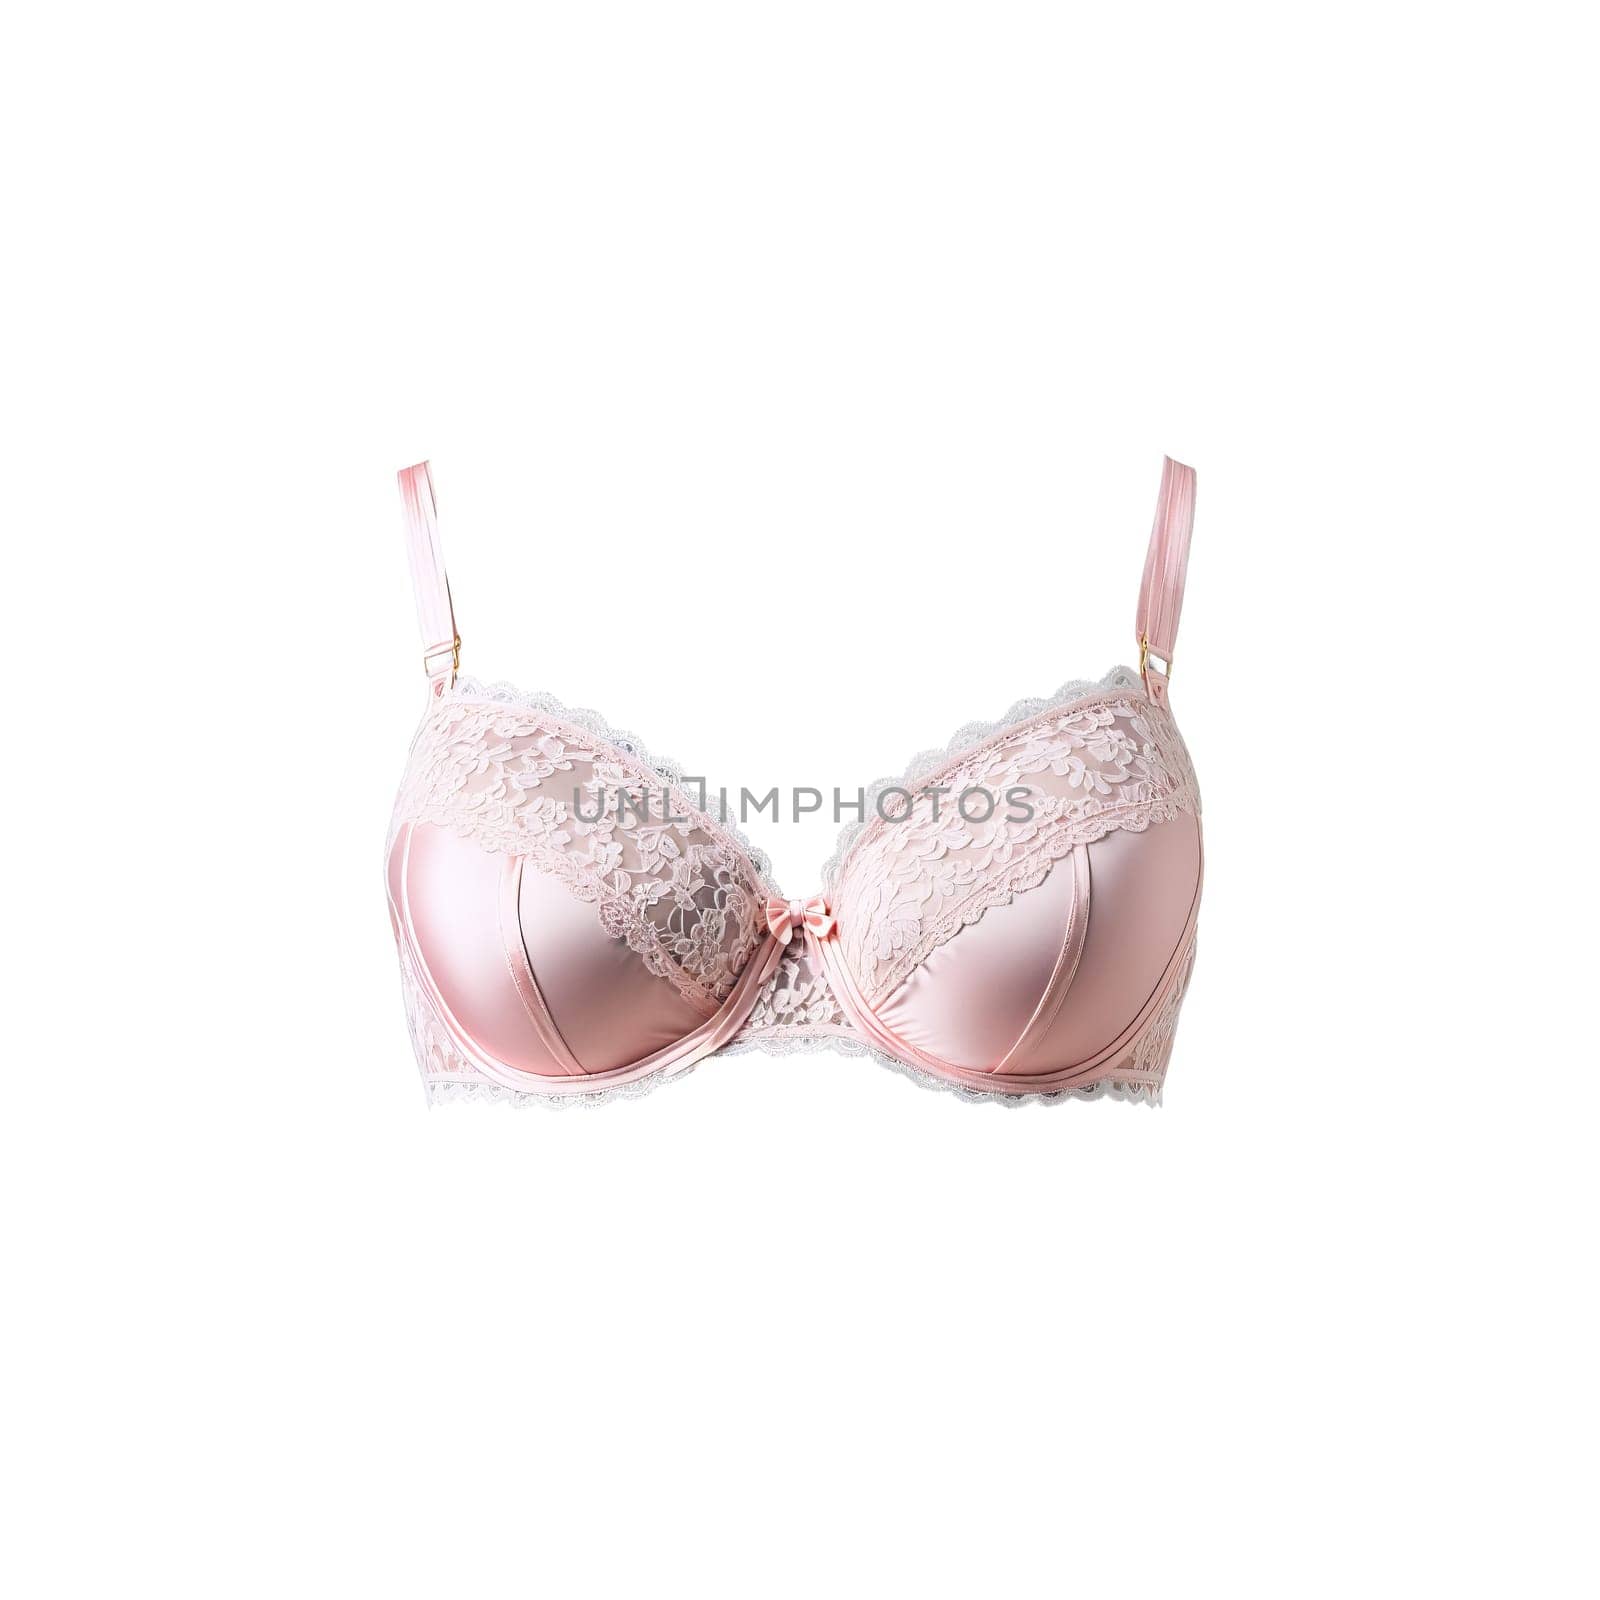 Romantic Blush Pink Lace Bra A romantic blush pink lace bra with a delicate feminine by panophotograph